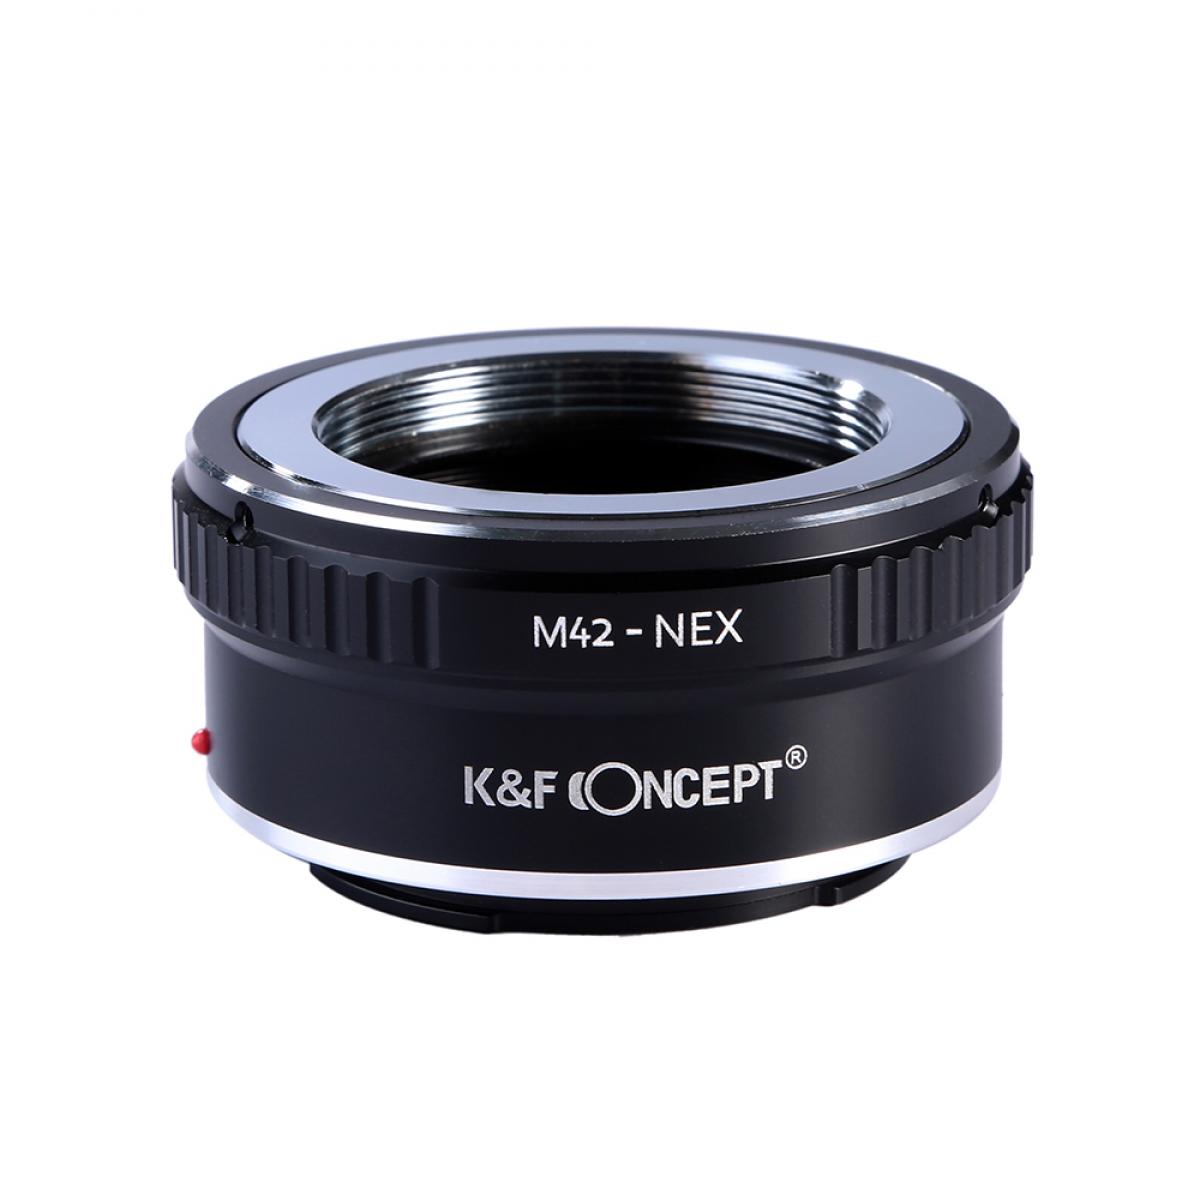 K&F M42 Lenses to Sony E Mount Camera Adapter K&F Concept Lens Mount Adapter